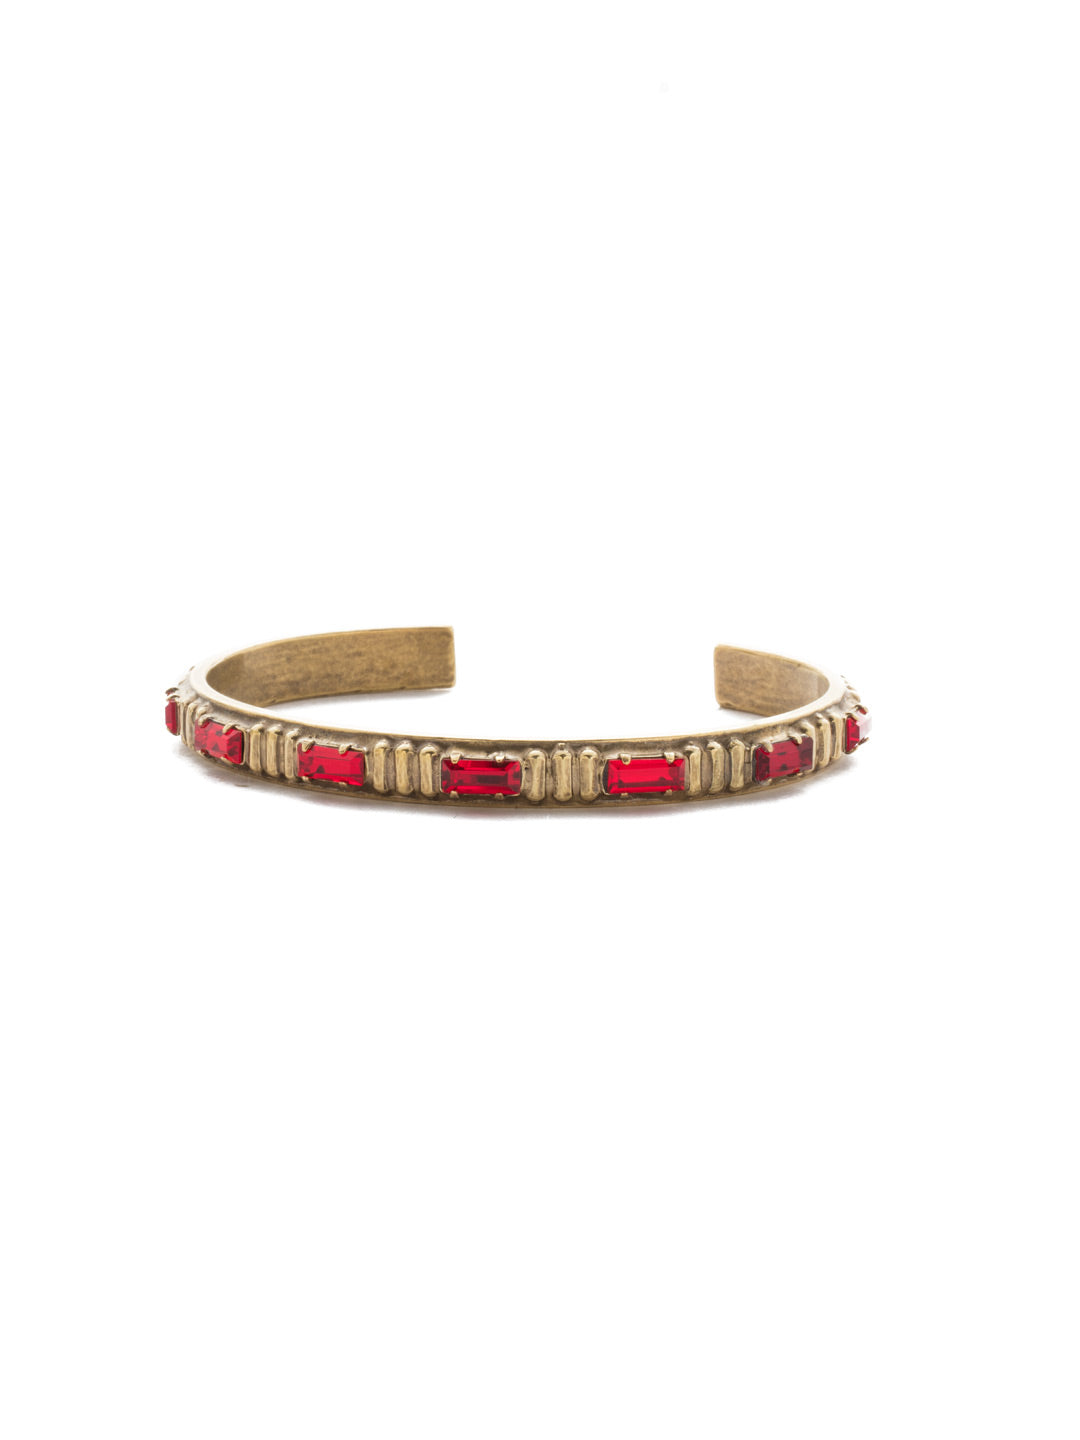 Eira Cuff Bracelet - BEF3AGSNR - <p>A unique design of pressed metal set with baguette crystals is sure to bring a timeless flair to any look and is conveniently made with a slip-on style. From Sorrelli's Sansa Red collection in our Antique Gold-tone finish.</p>